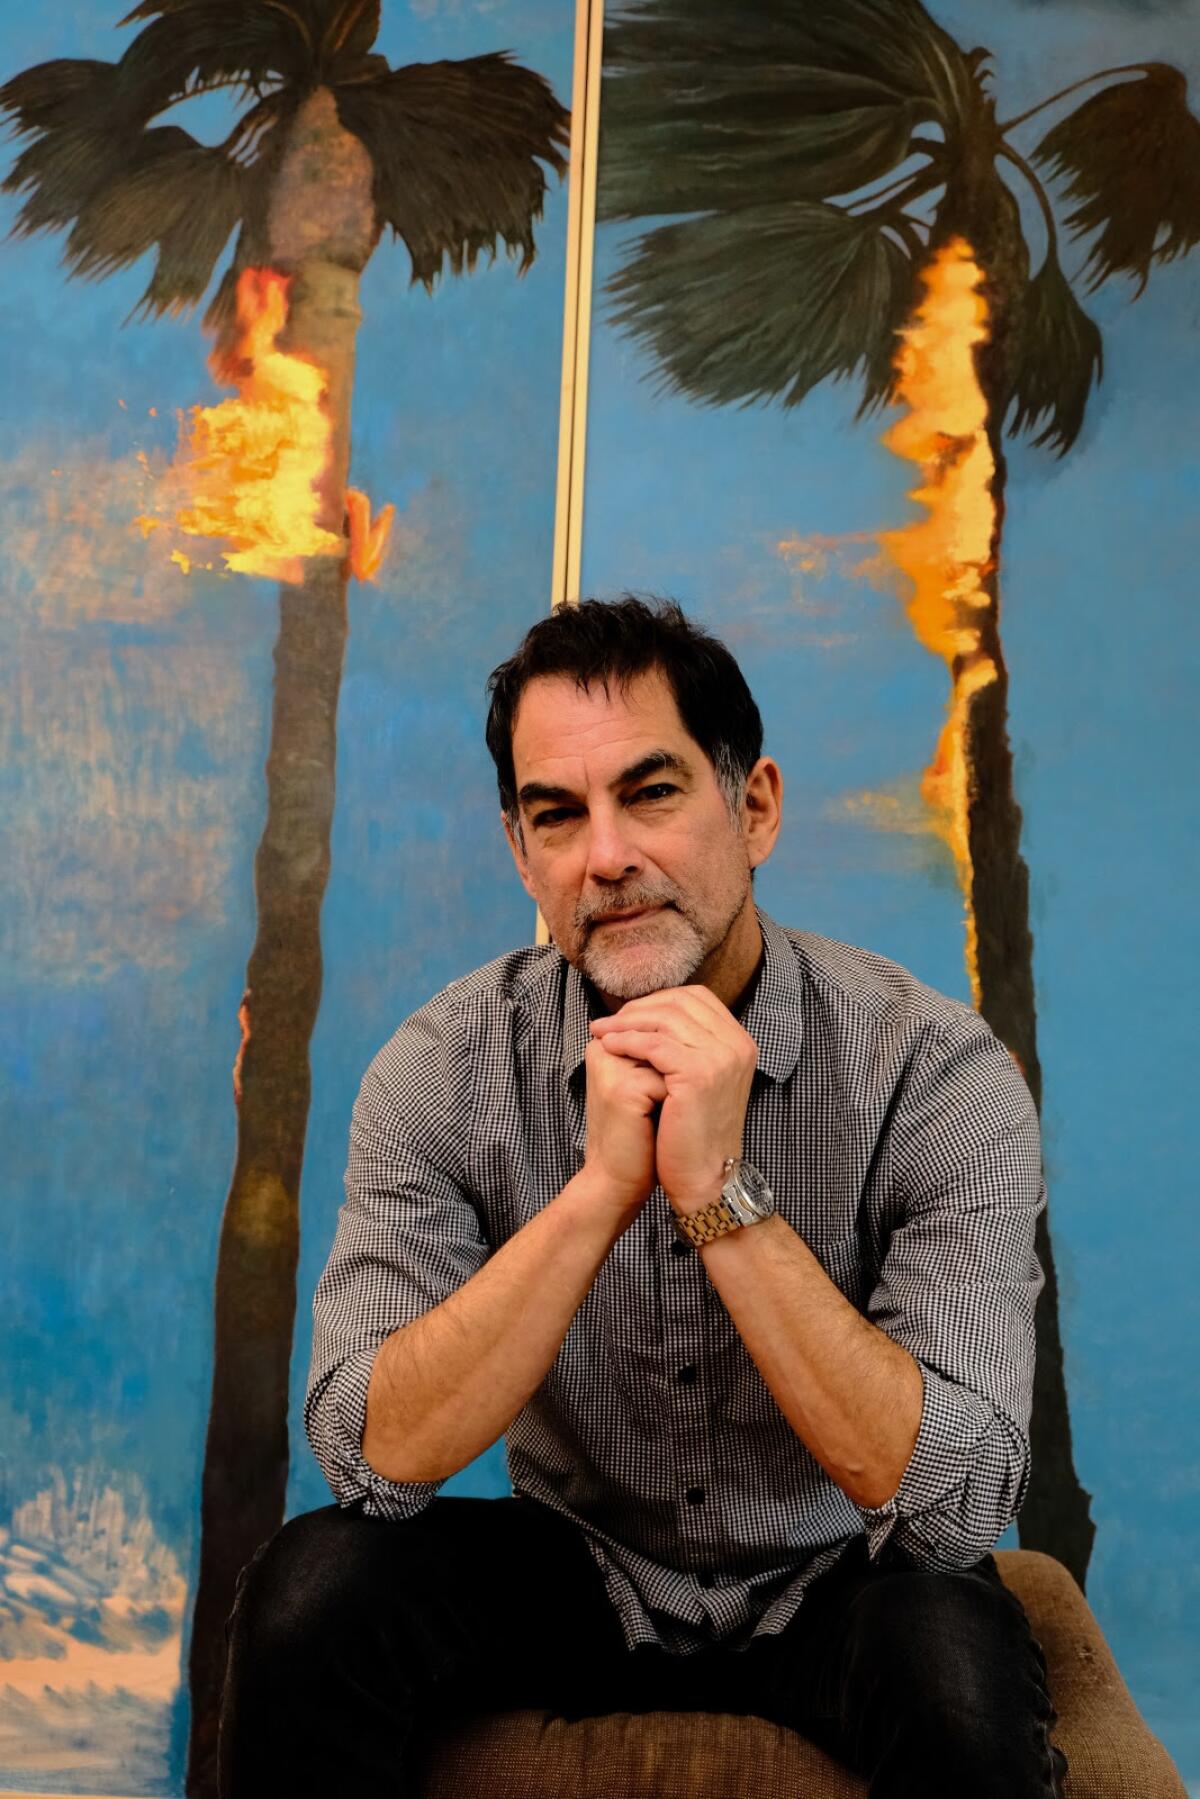 Quint Gallery in La Jolla will present an opening reception for artist Perry Vasquez's exhibition “Some Palms” on Jan. 28.